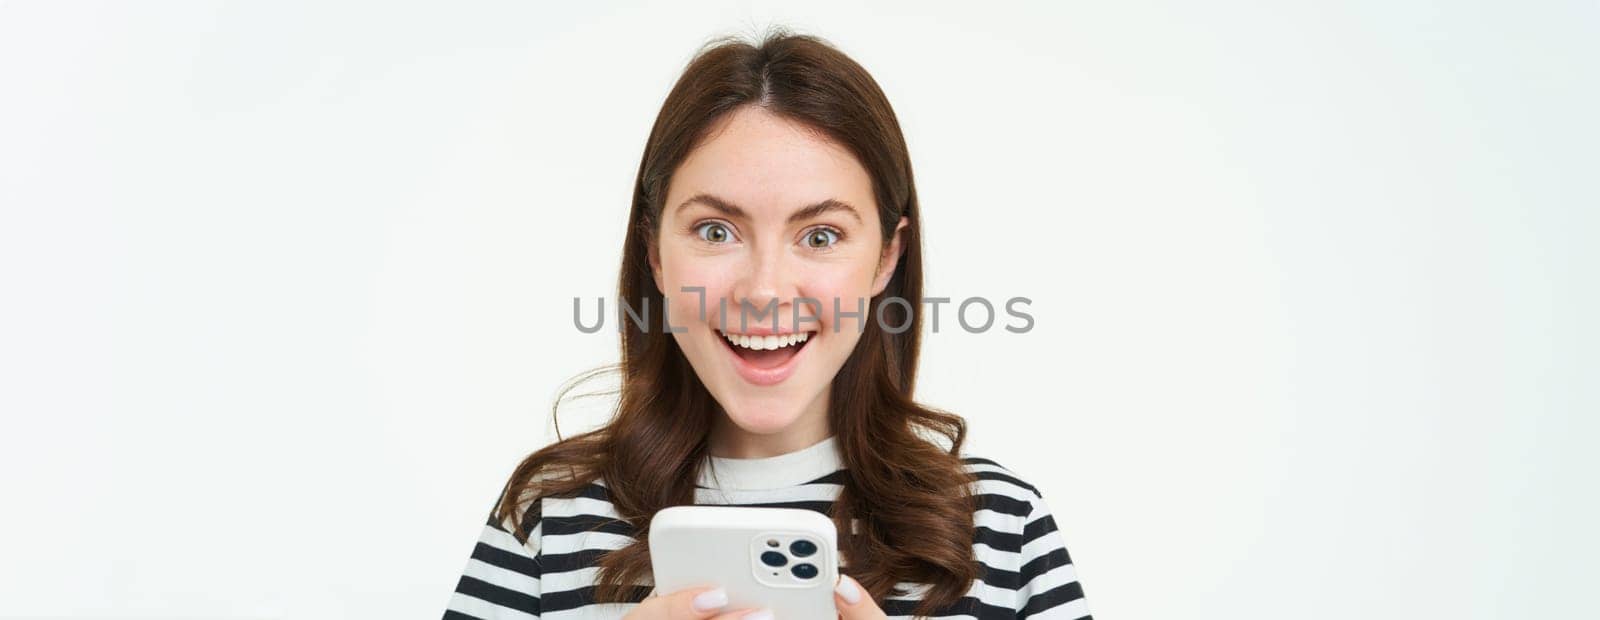 Portrait of excited brunette girl, reacting to amazing promo on smartphone, holding mobile phone and smiling, isolated on white background.